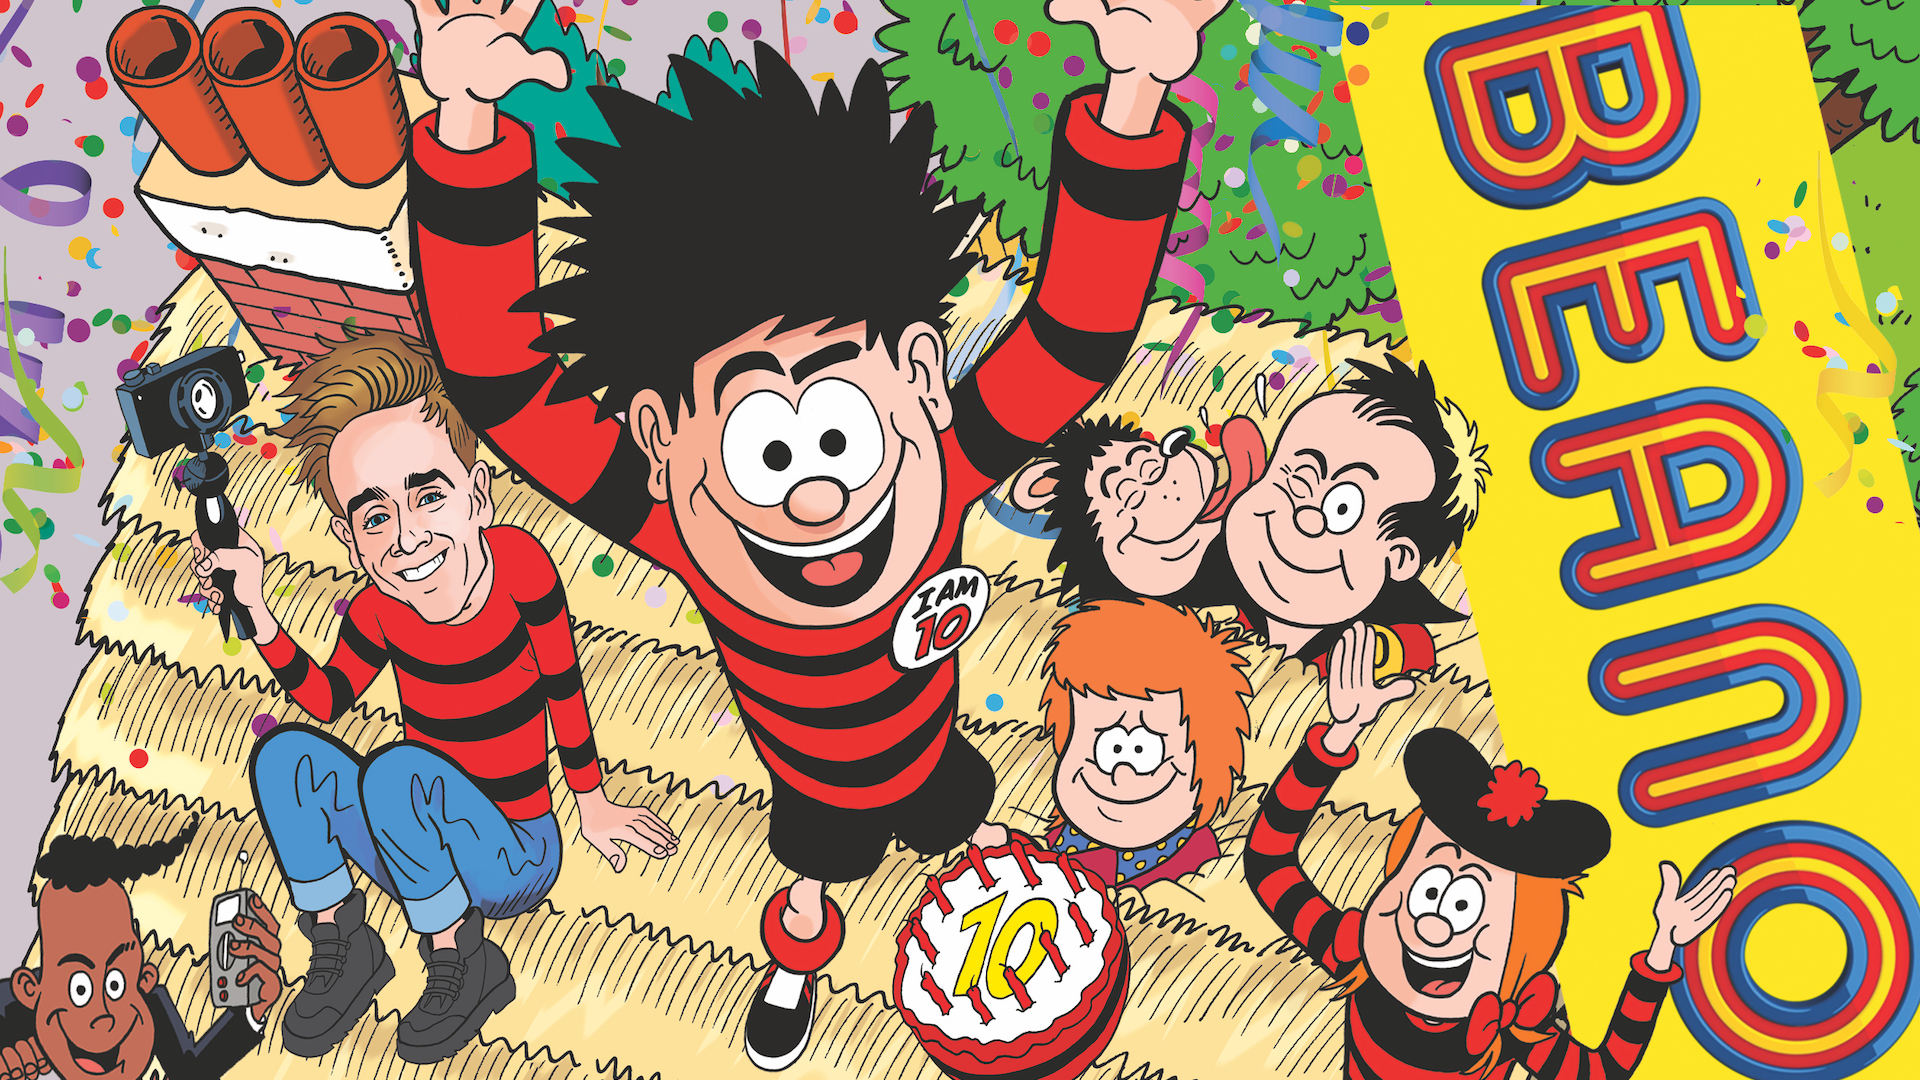 The cover of Beano 4077 – It's Dennis' birthday